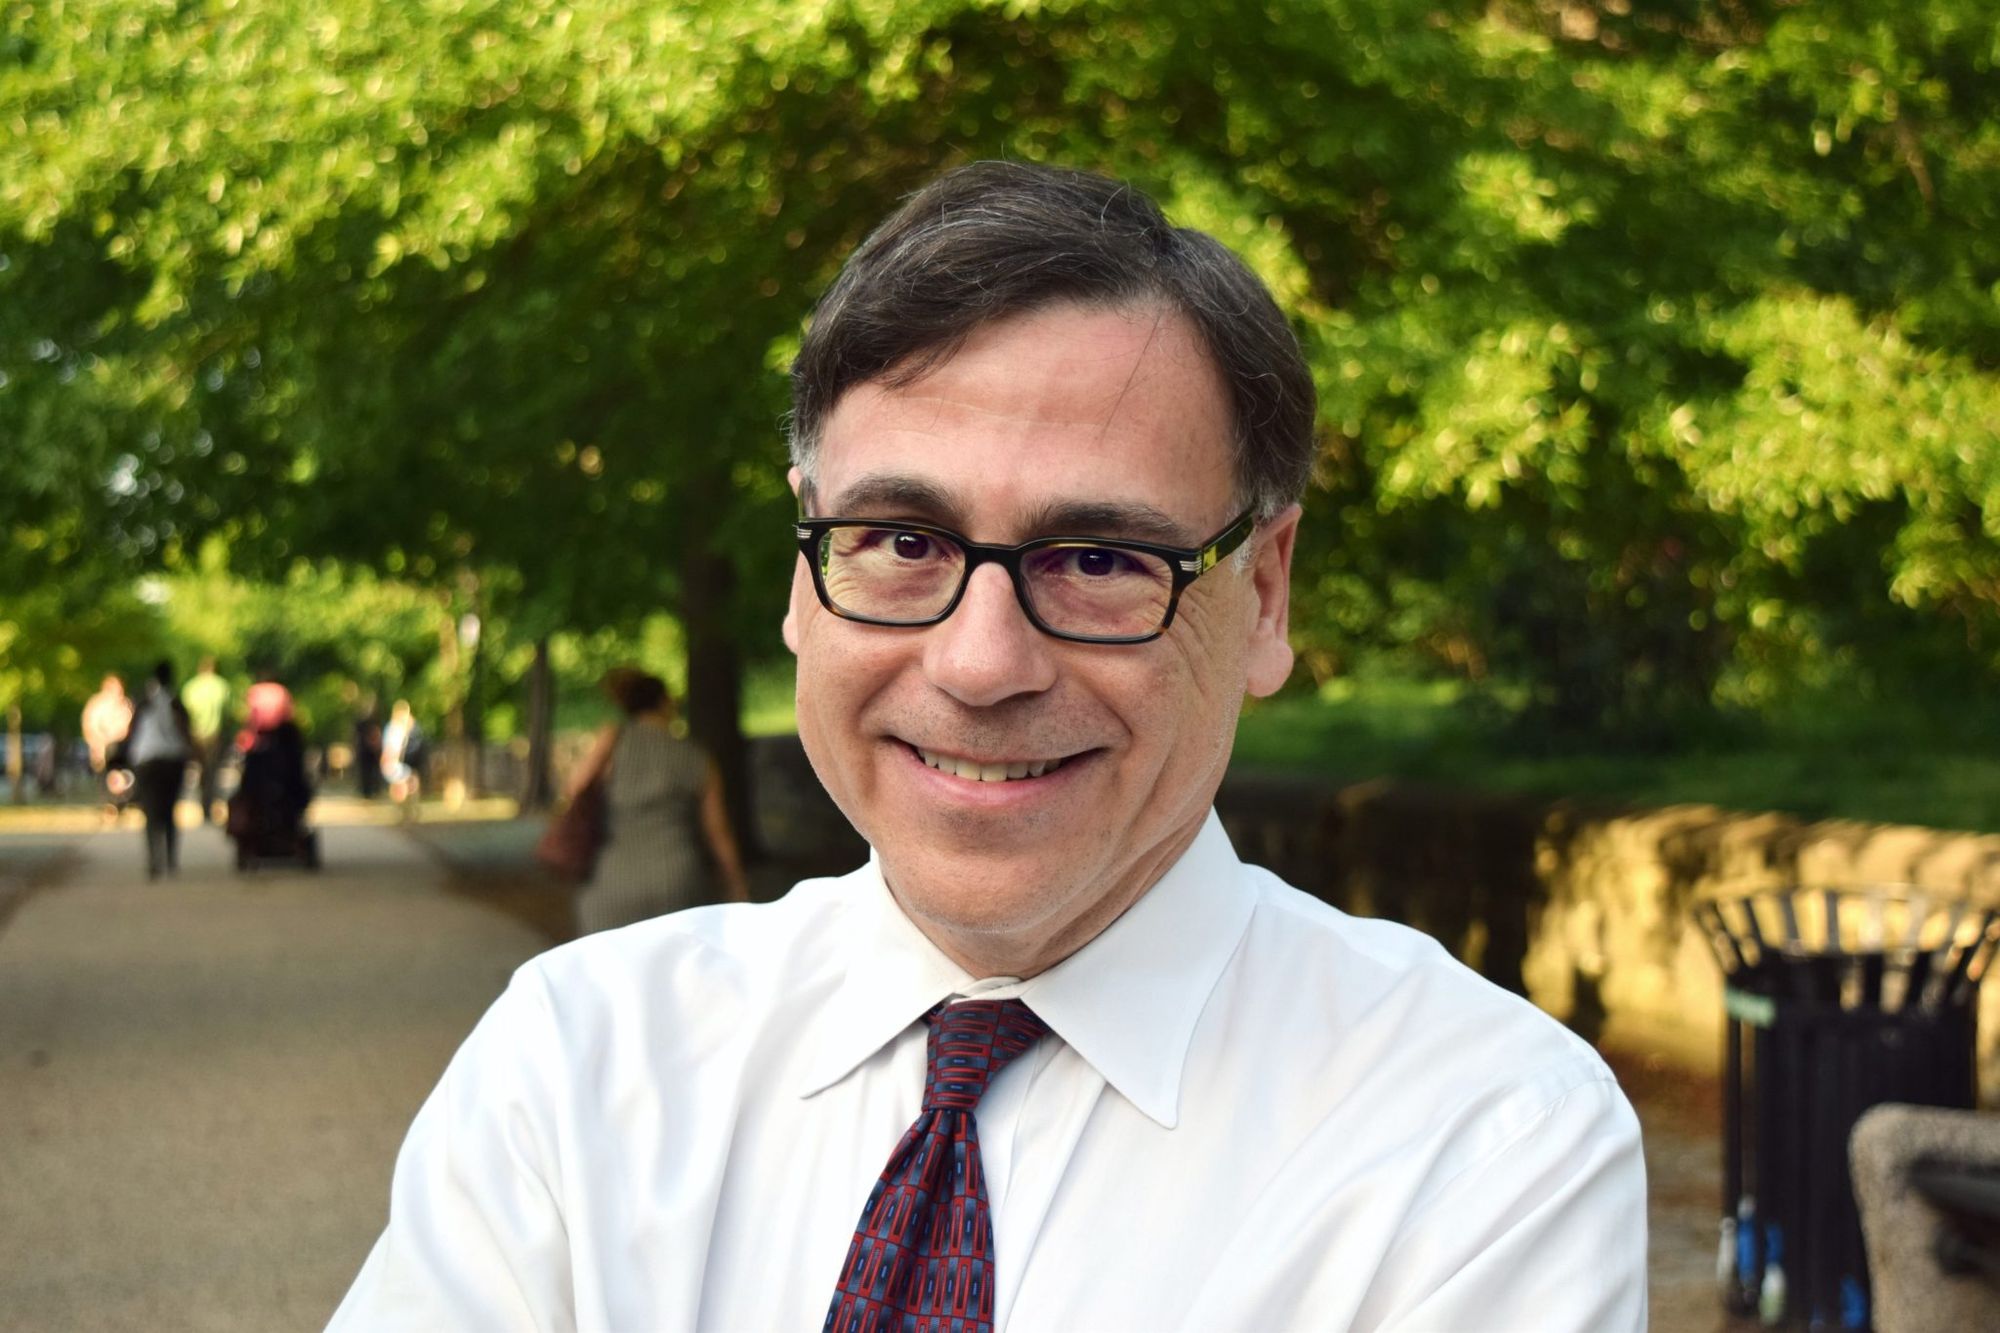 Meet Your Candidate: Park Slope Attorney Richard Bashner Is Running For Mayor